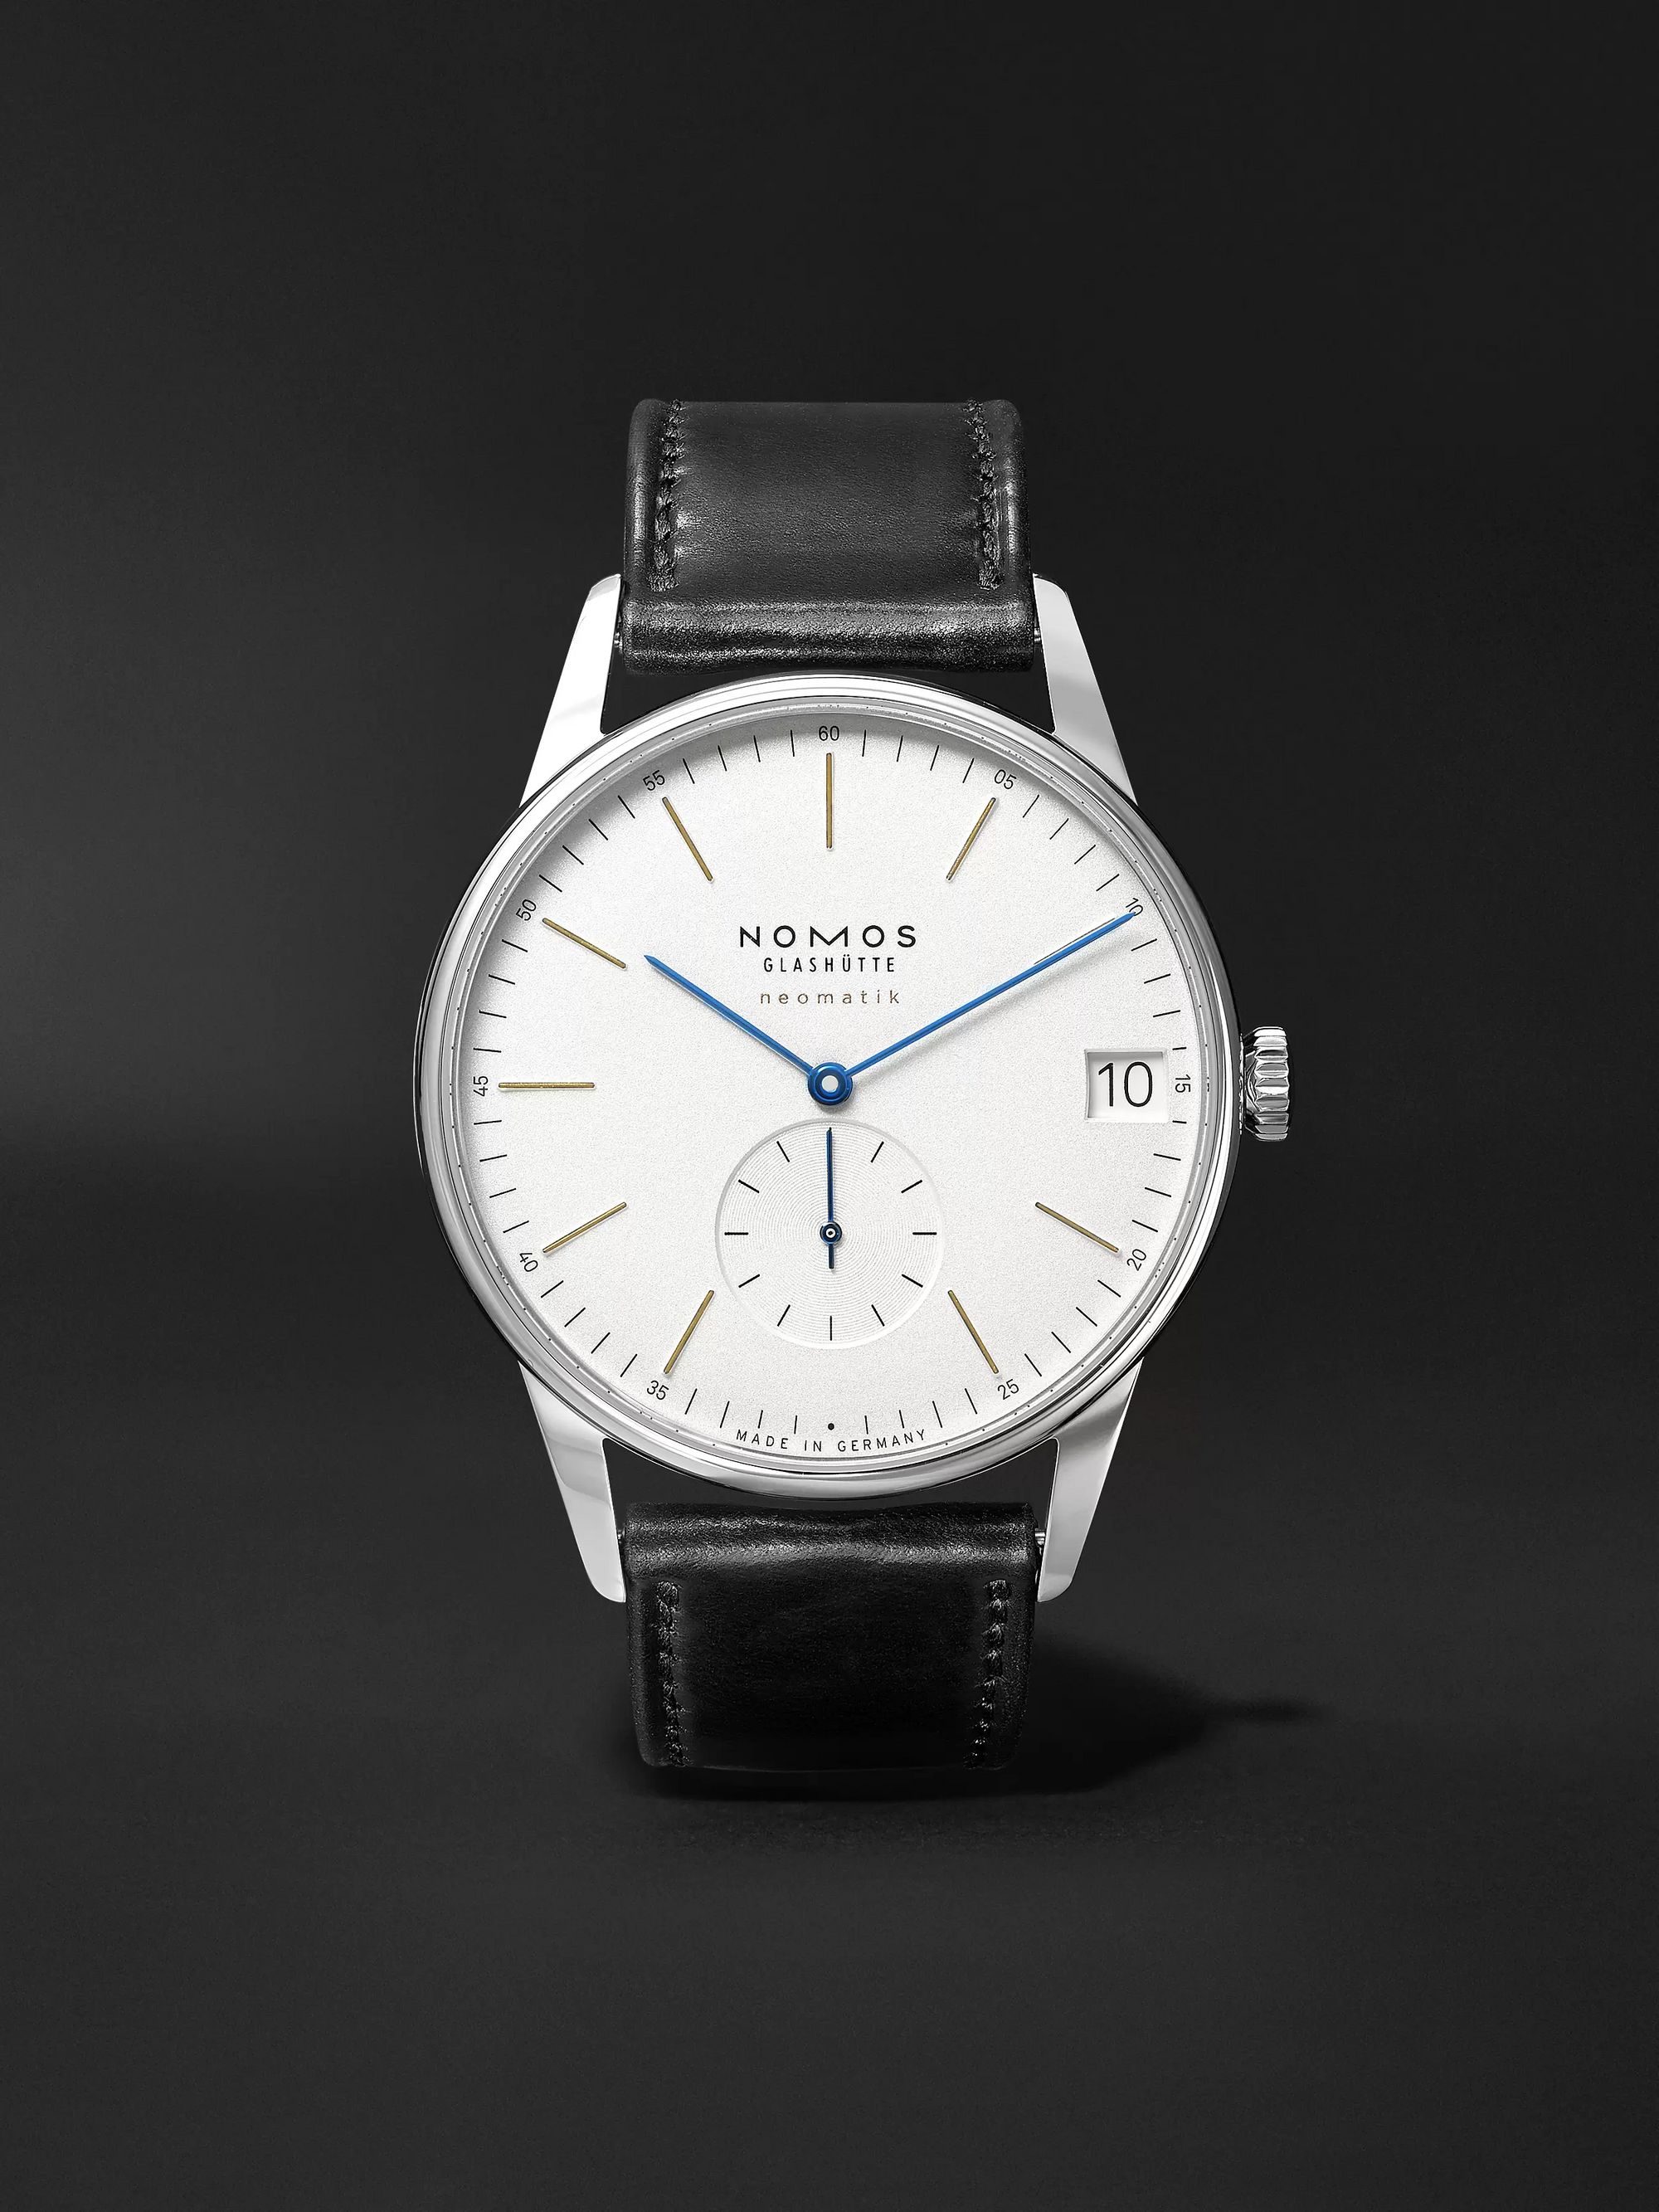 NOMOS GLASHÜTTE Orion Neomatik Automatic 41mm Stainless Steel and Leather Watch, Ref. No. 360